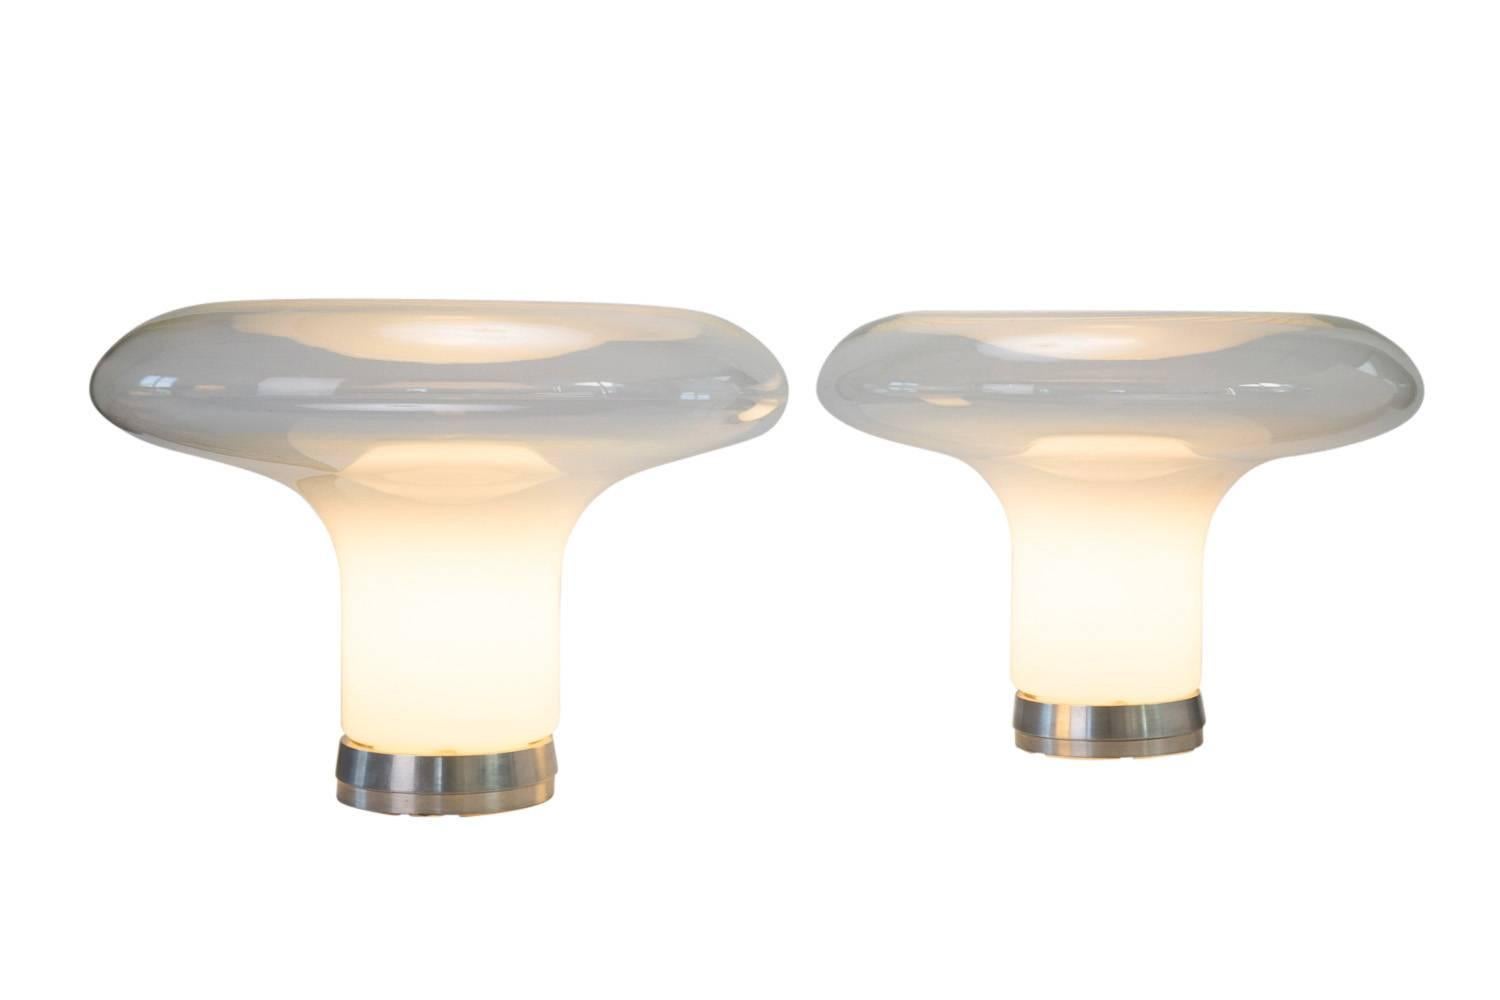 Pair of Angelo Mangiorotti Murano glass lamps with an aluminium base. Signed and numbered.